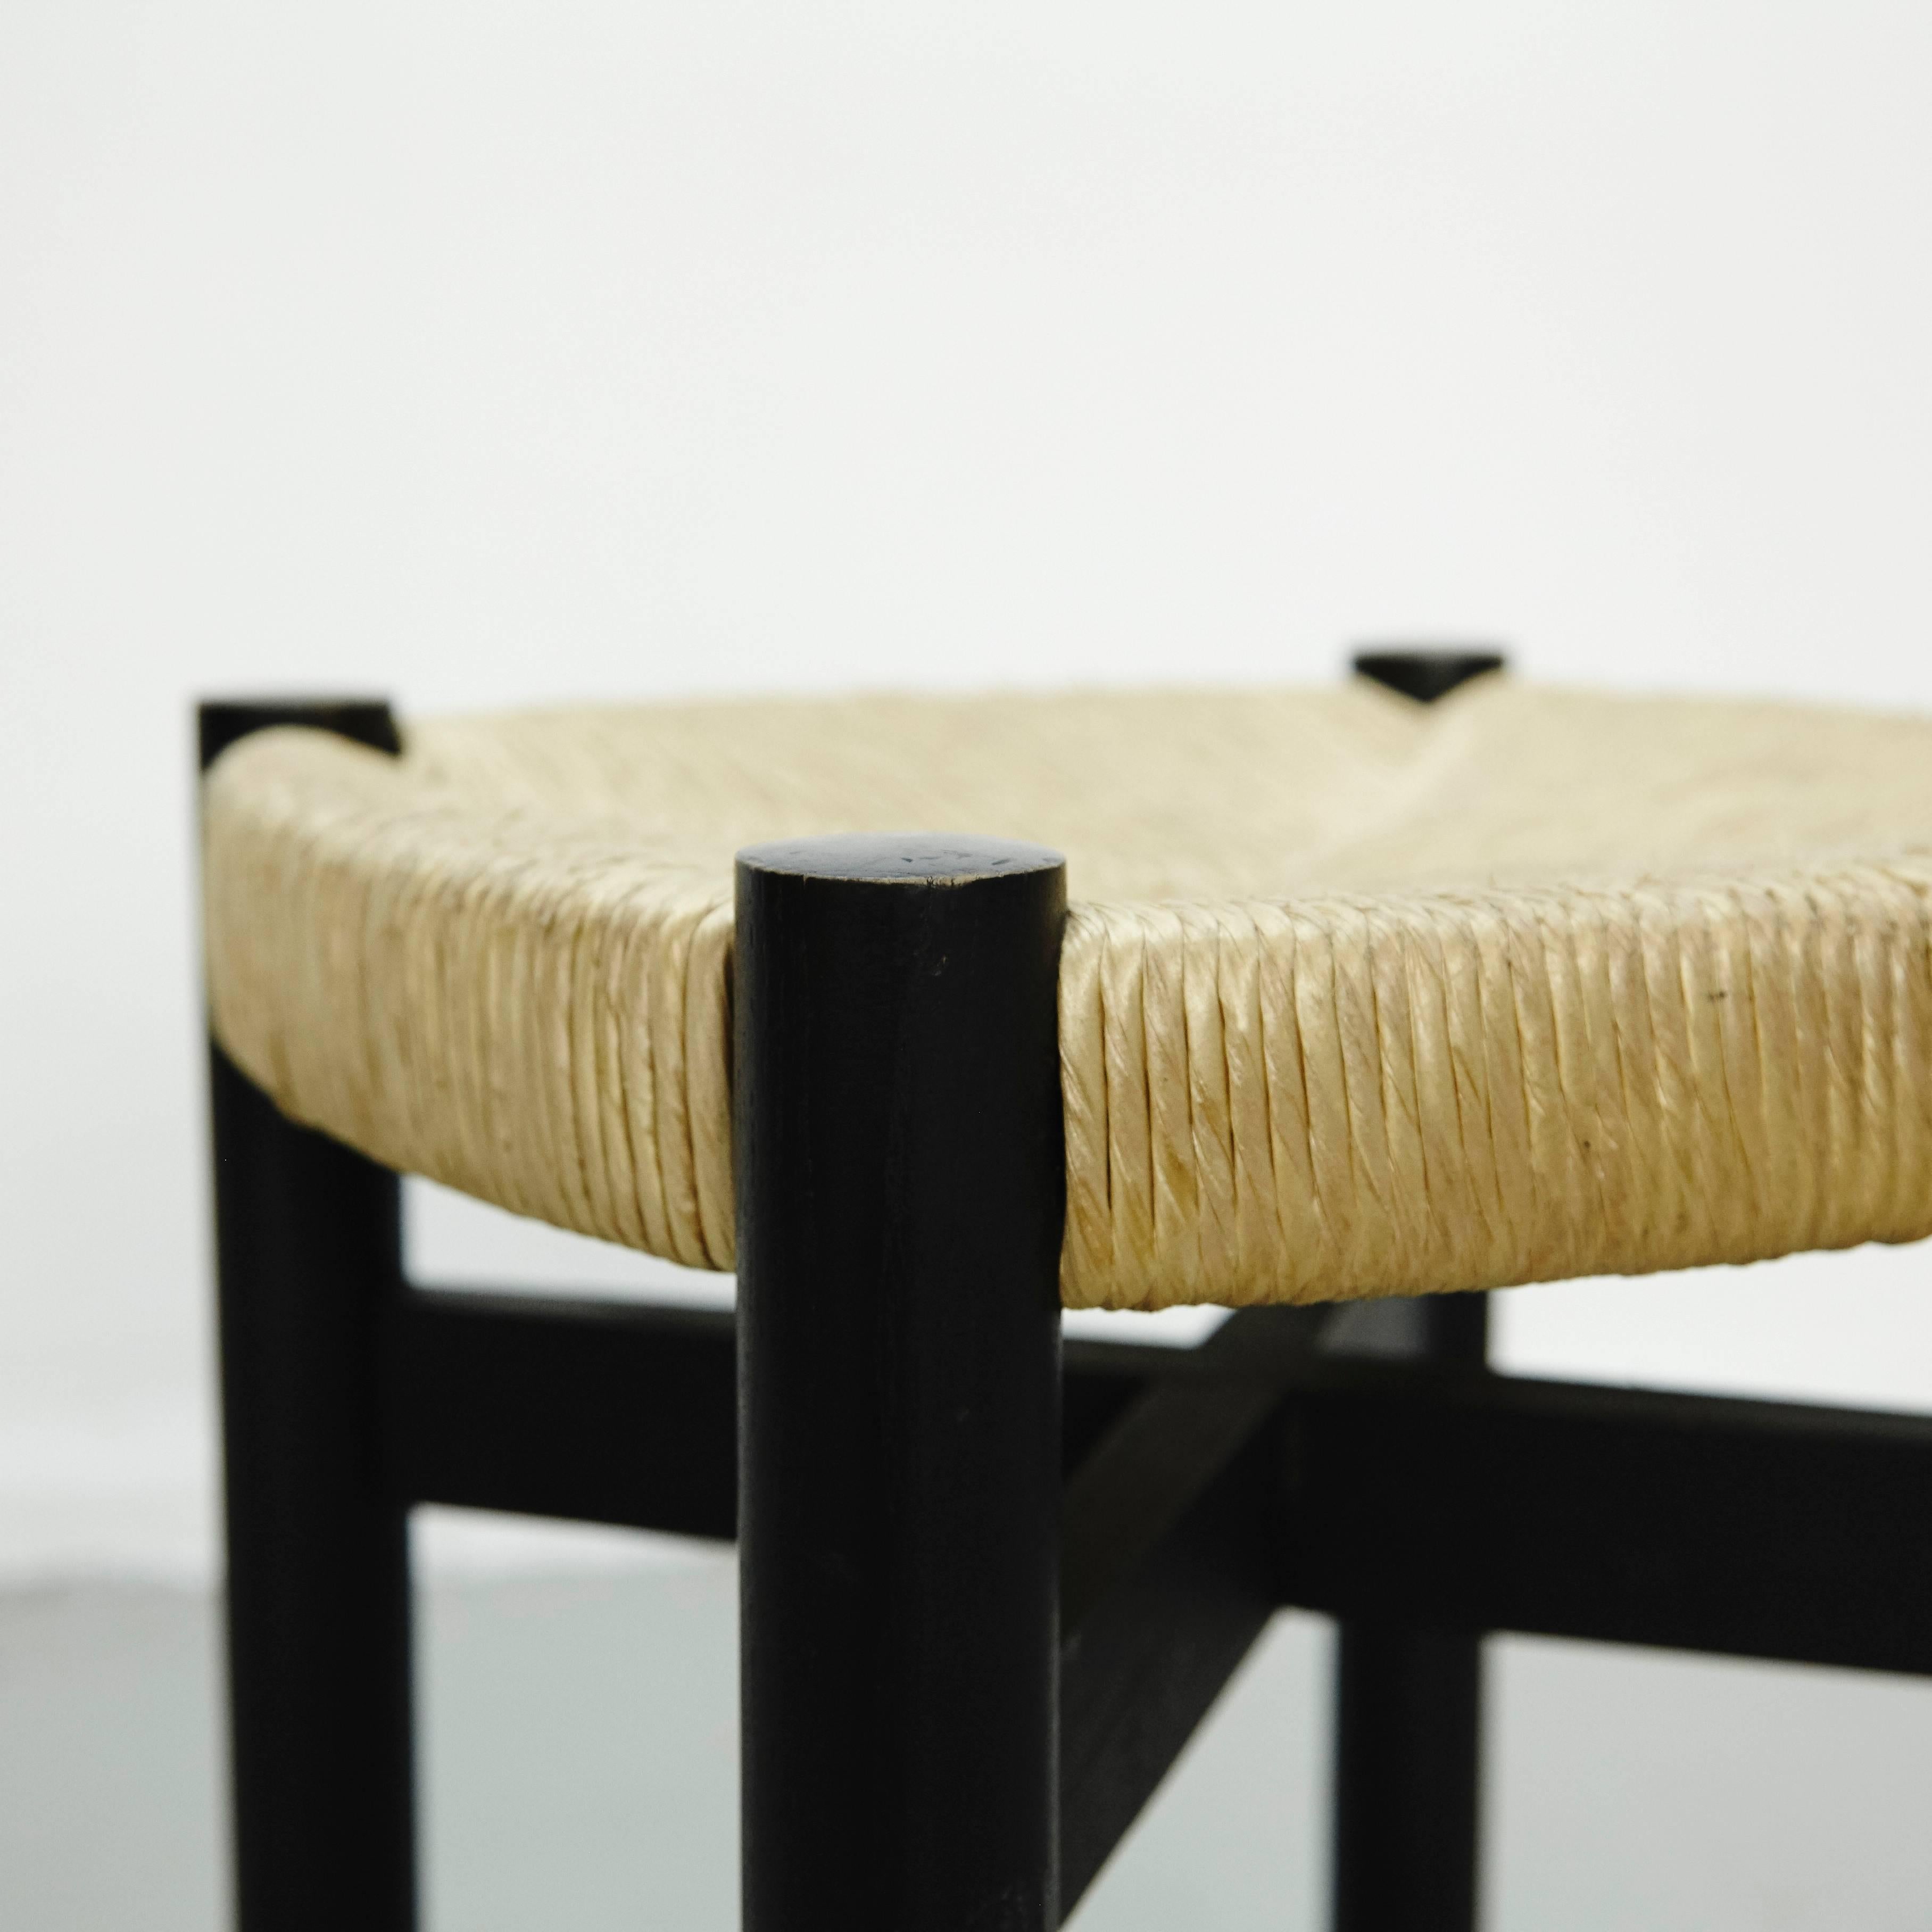 Mid-20th Century Pair of Stools by Charlotte Perriand for Meribel, circa 1950